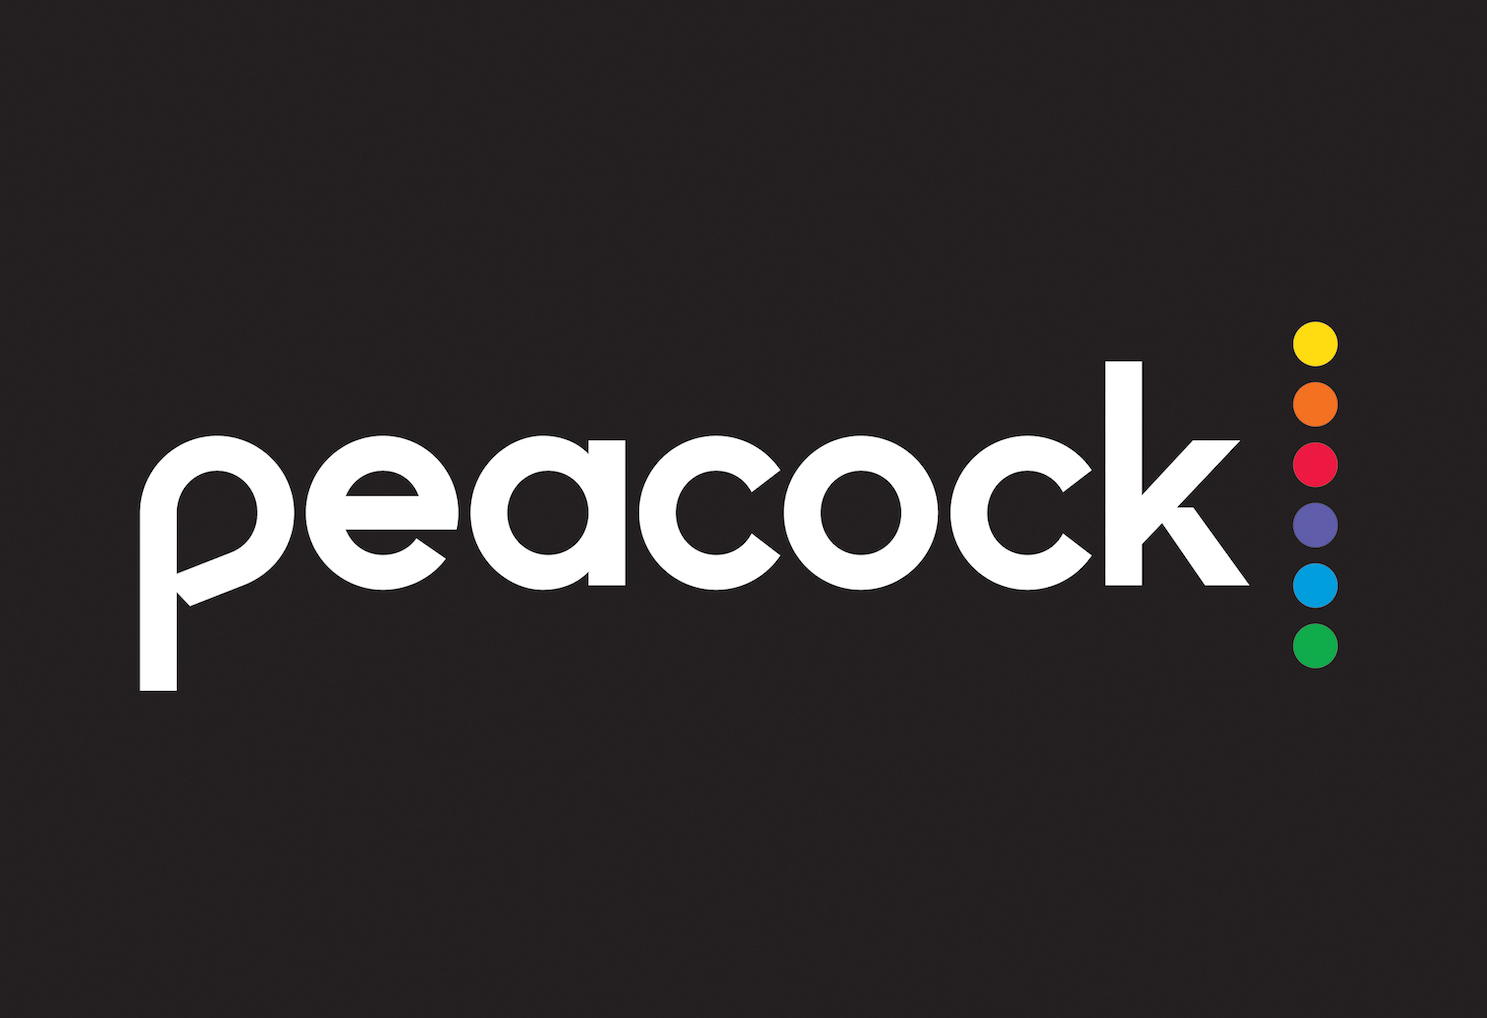 Peacock (Image courtesy of NBCUniversal)